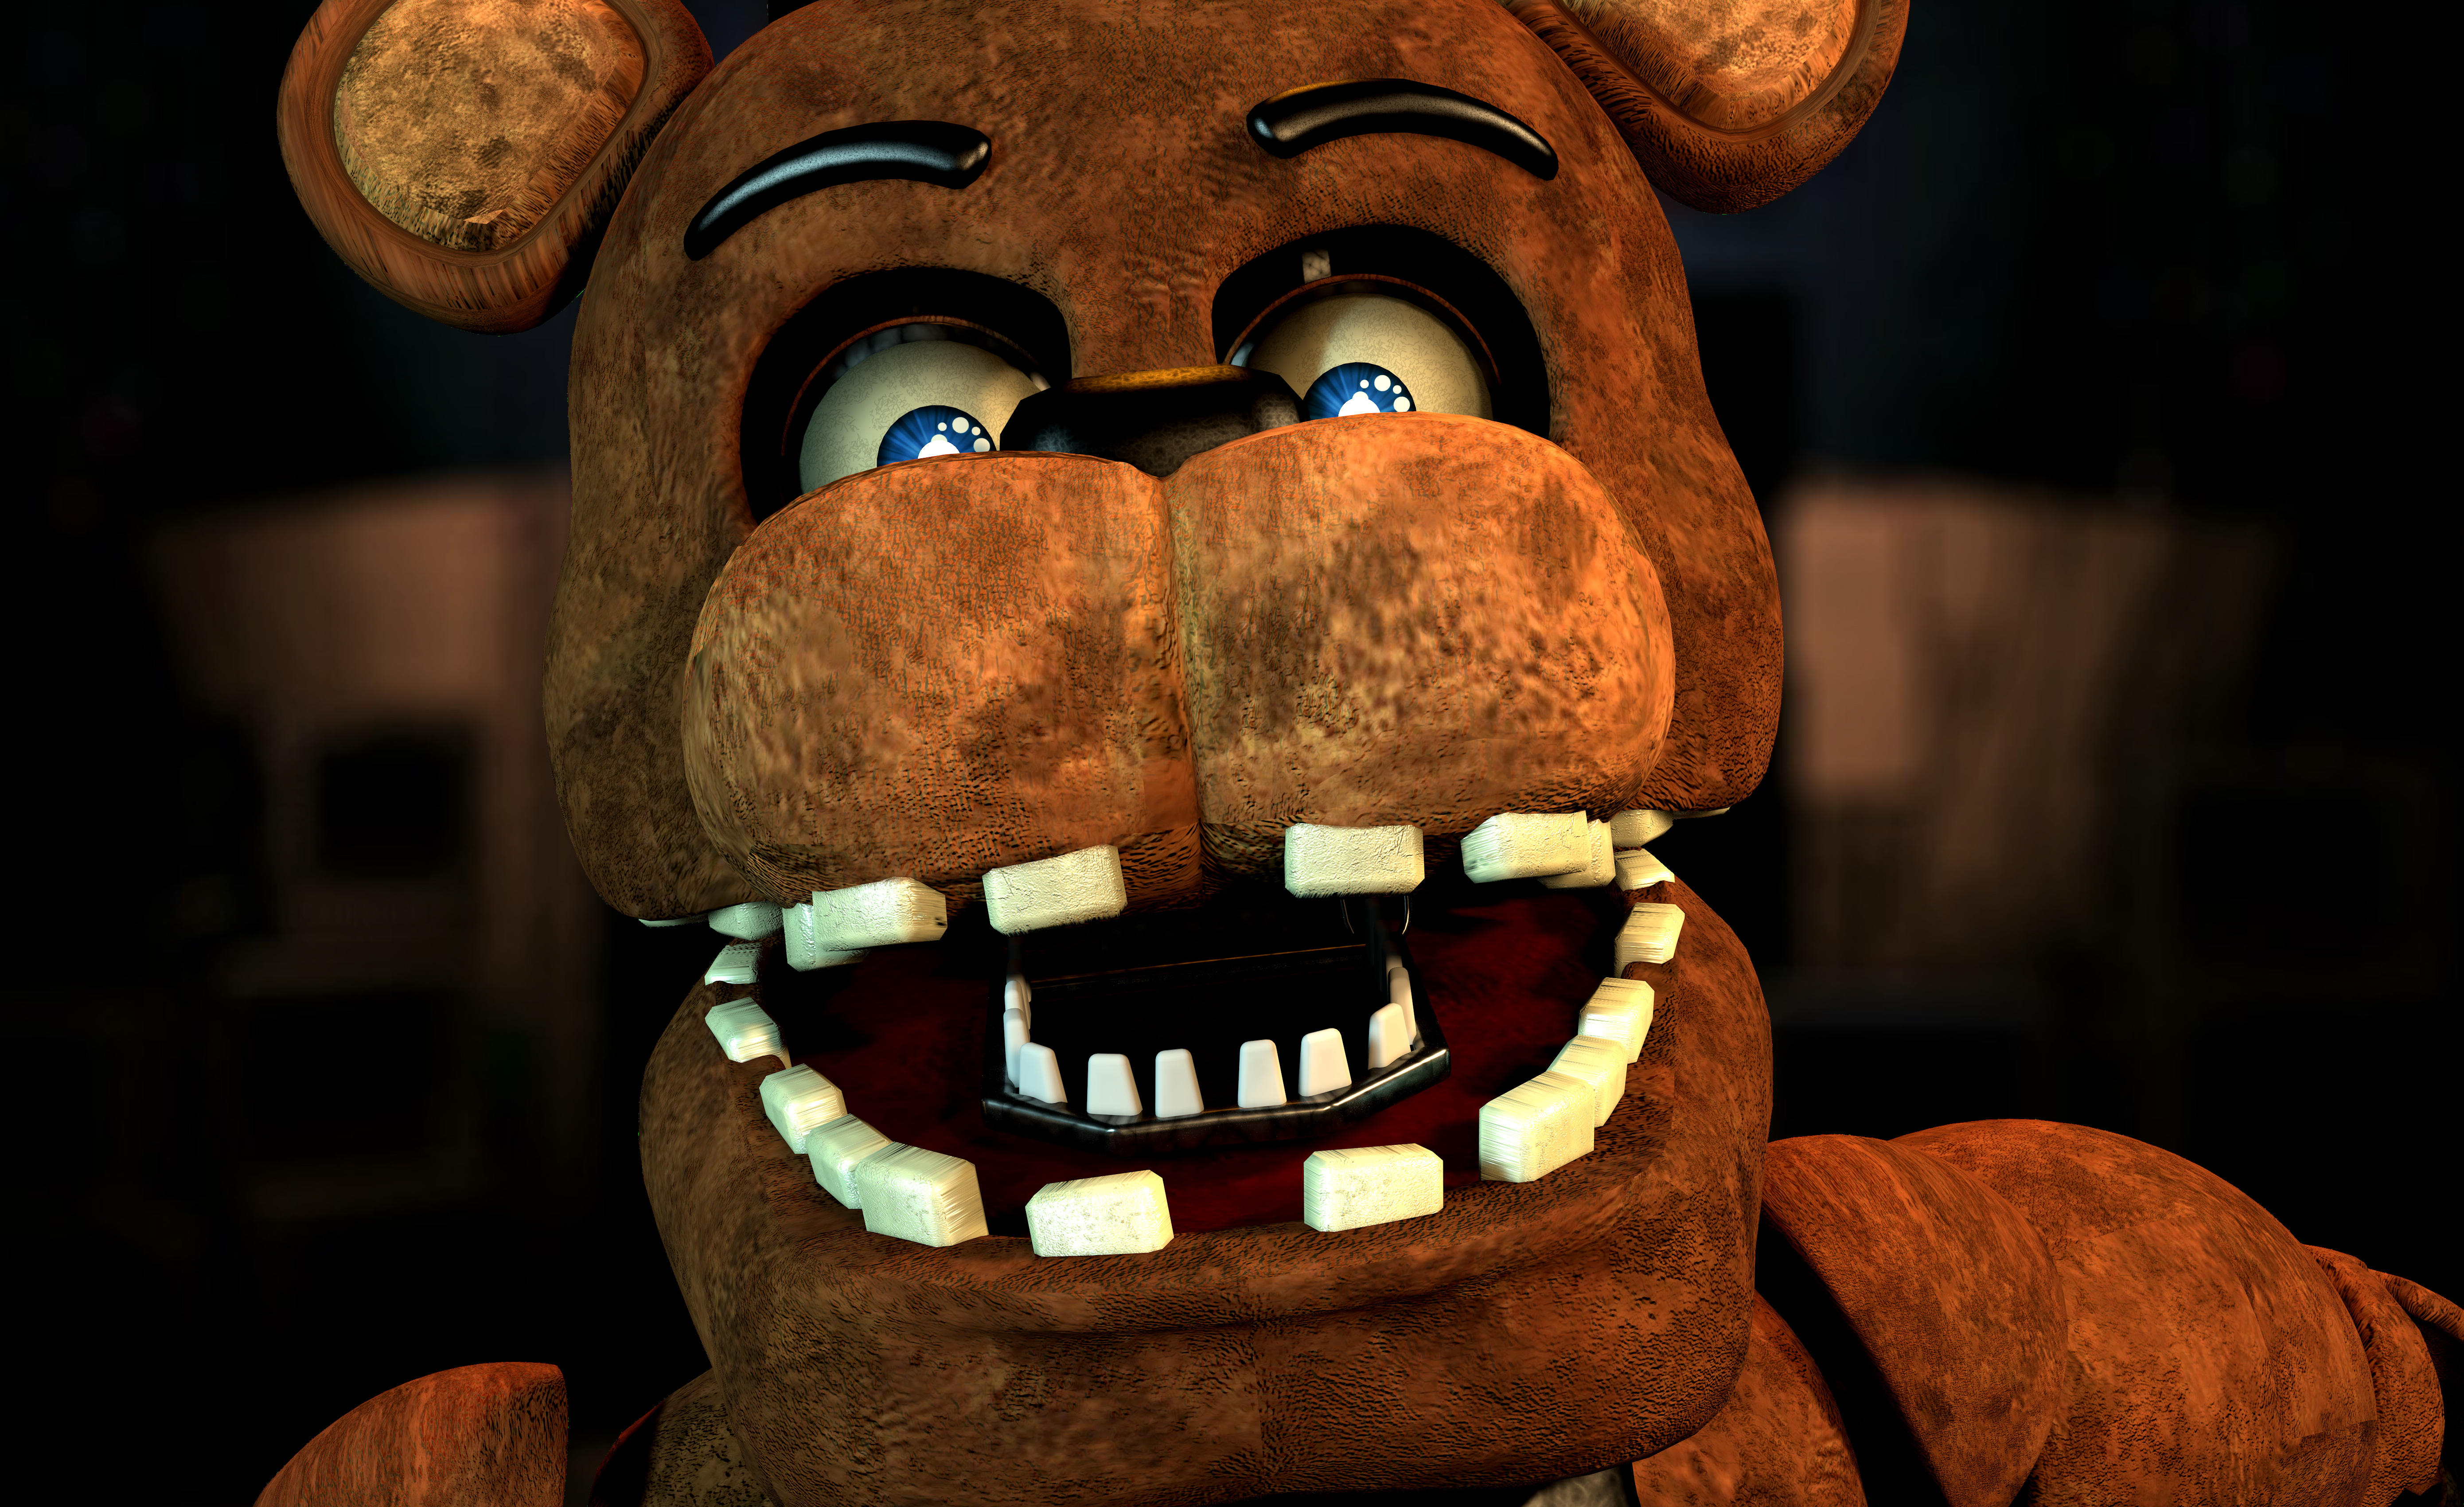 Five Nights at Freddy's 2 - Withered Freddy JUMPSCARE!!! 